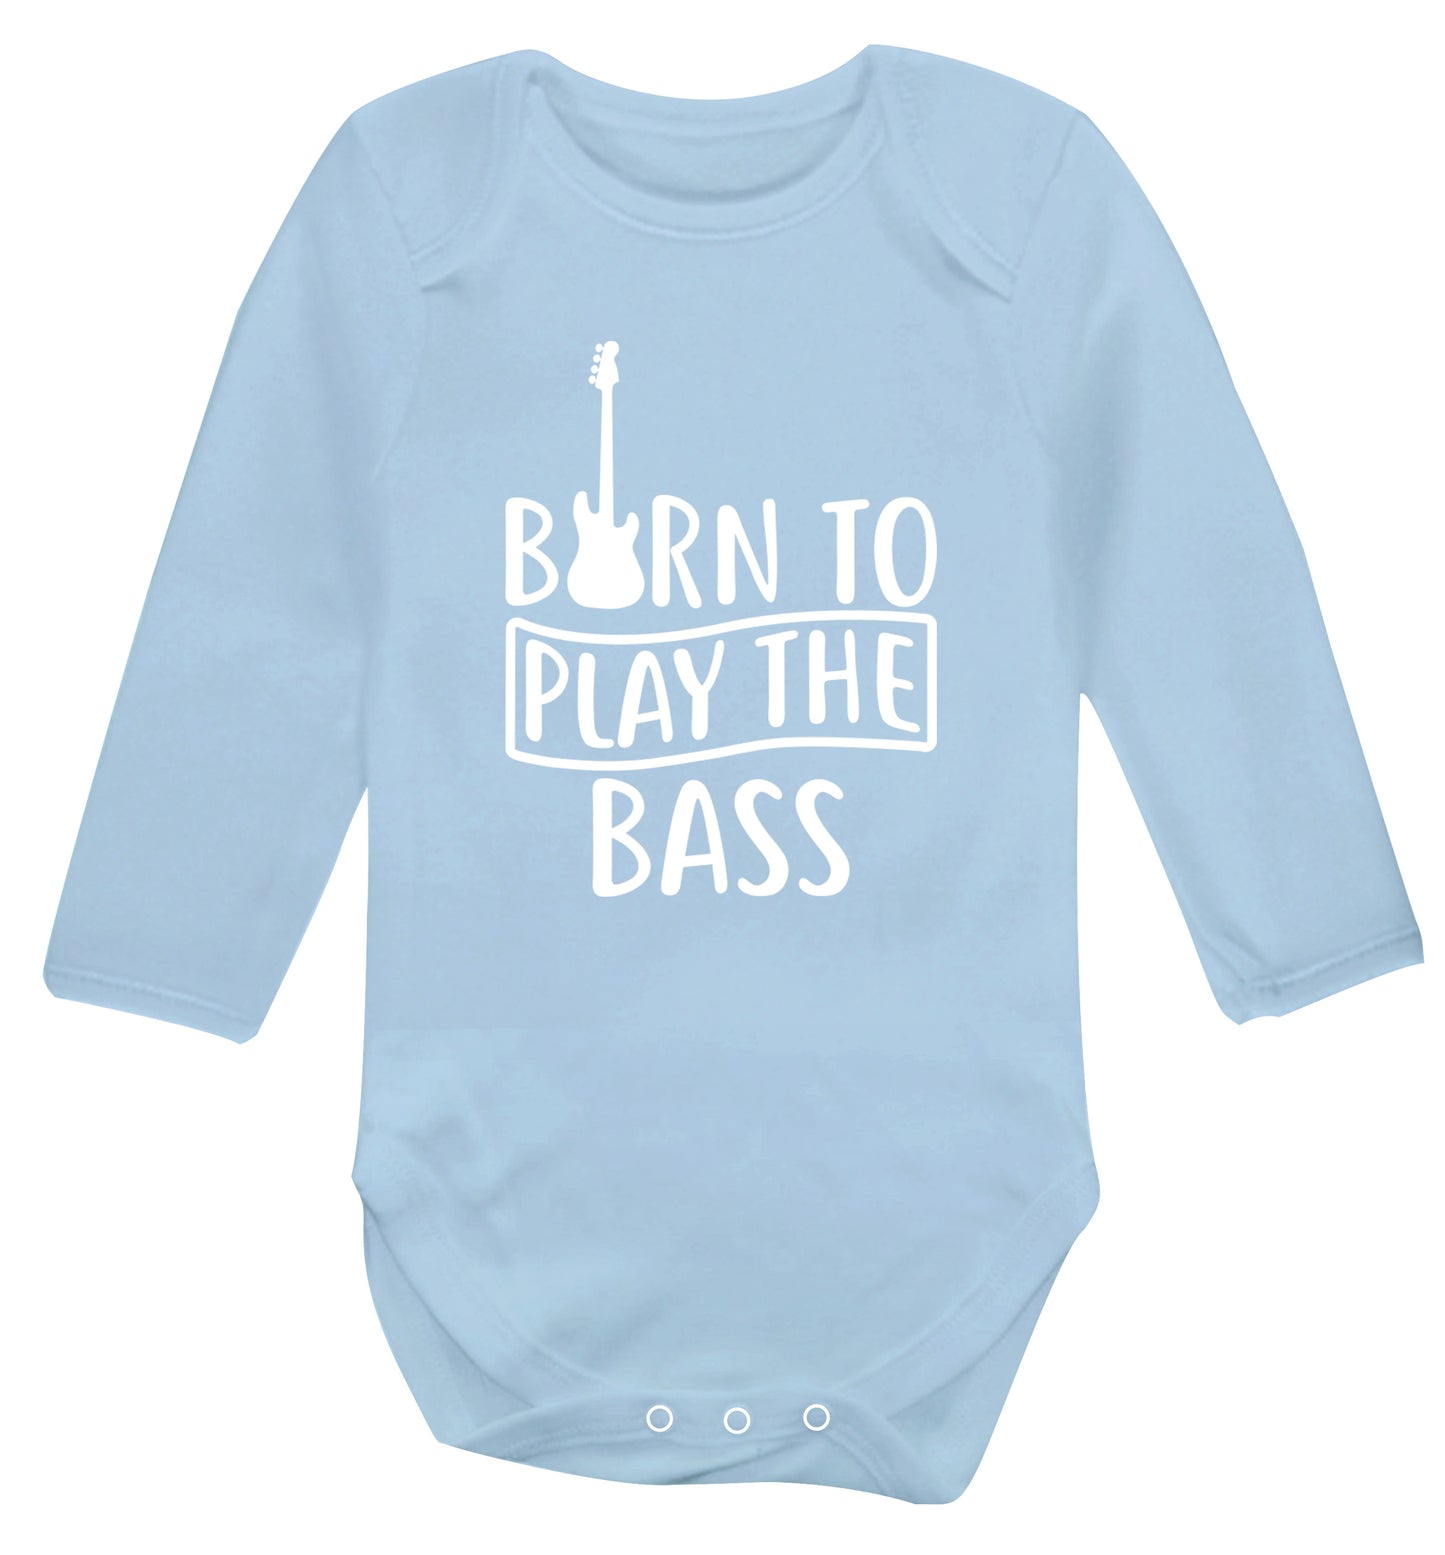 Born to play the bass Baby Vest long sleeved pale blue 6-12 months